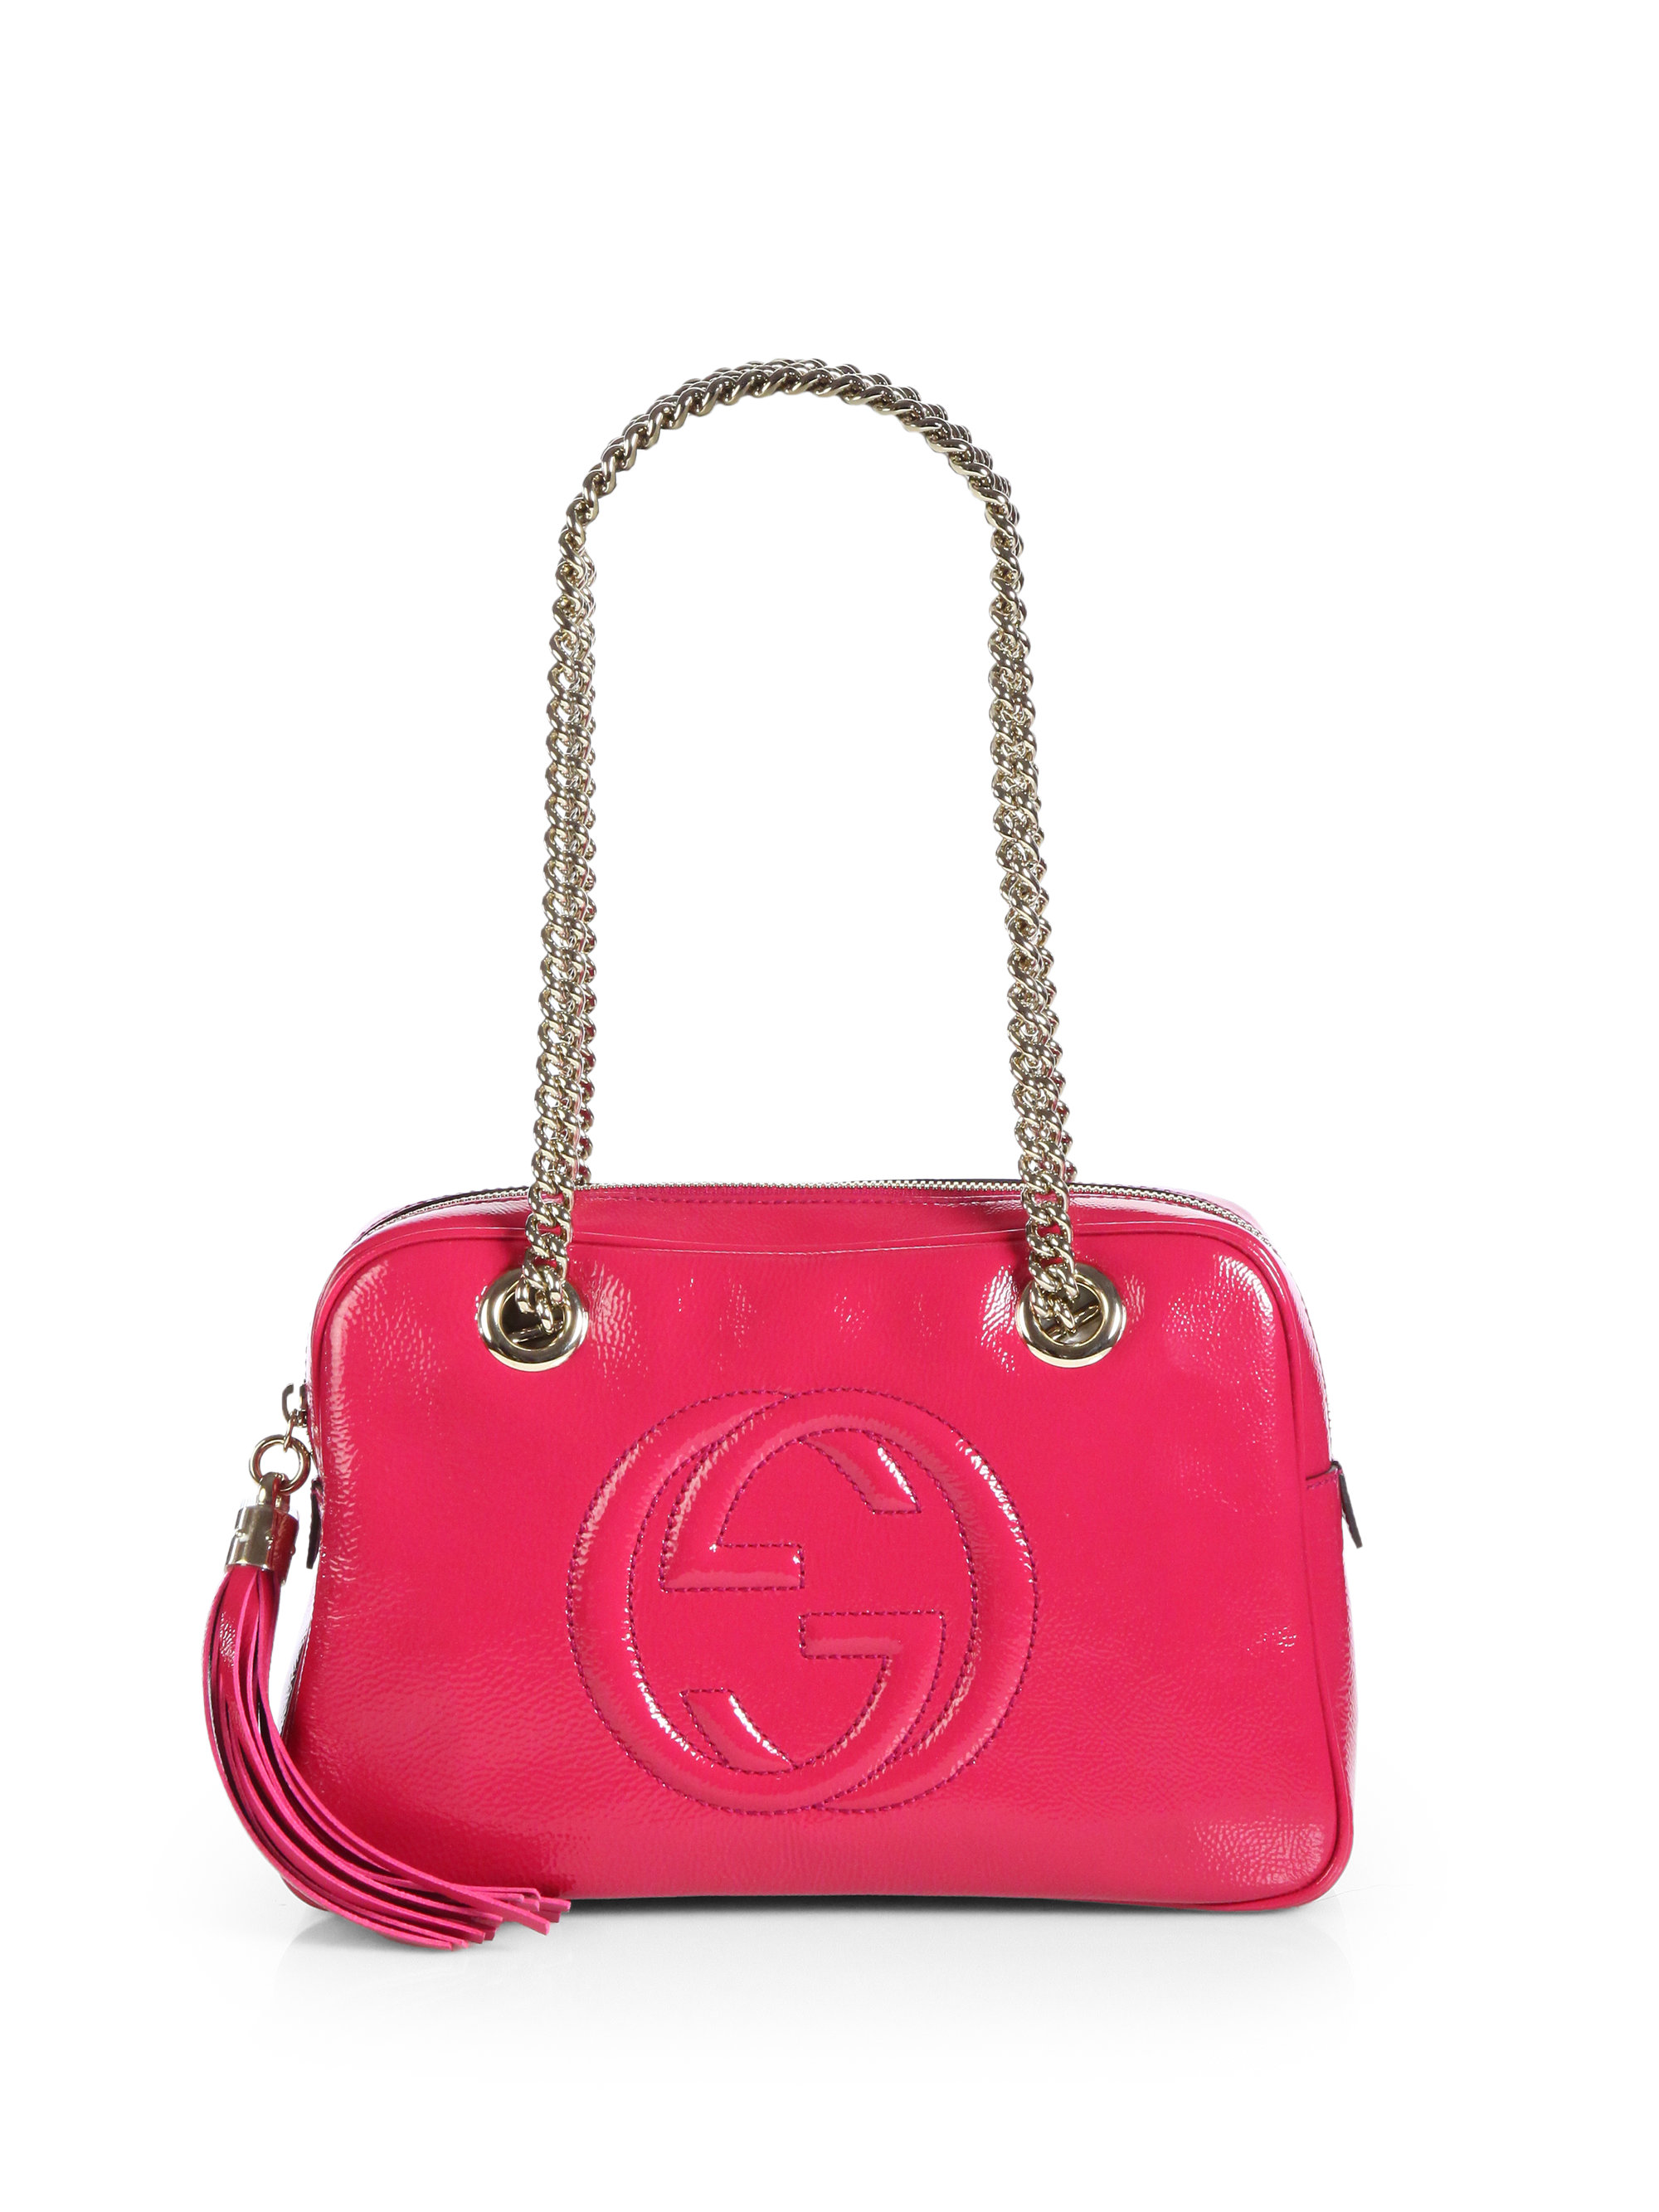 Gucci Soho Patent Leather Shoulder Bag in Pink (BRIGHT PINK) | Lyst